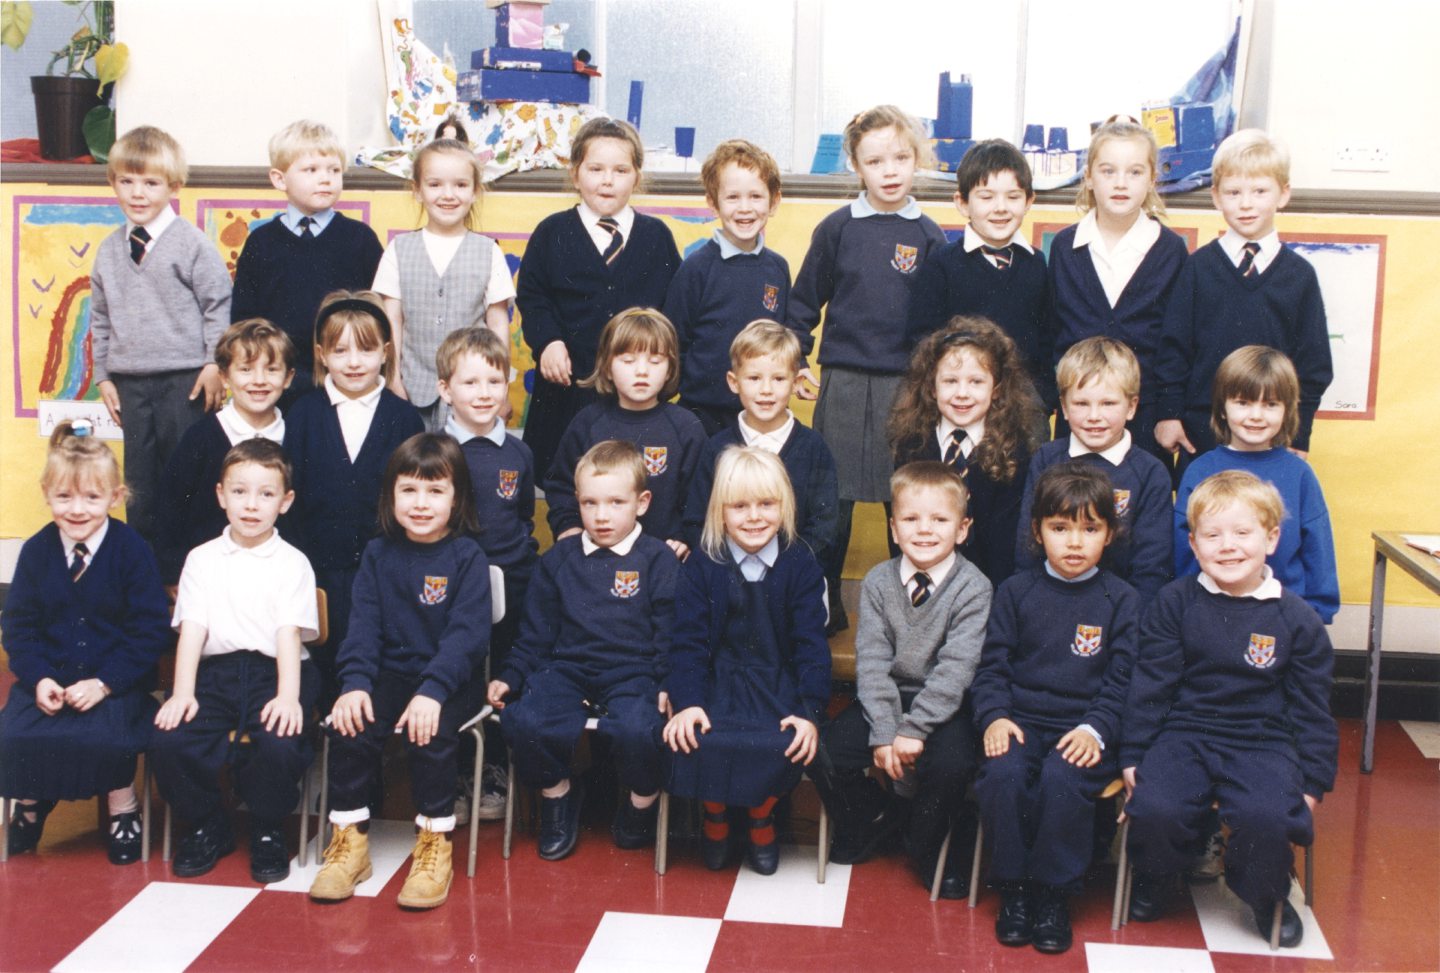 Class photos of the primary one pupils taught by Mrs Cassie and Mrs Gauld in 1994.